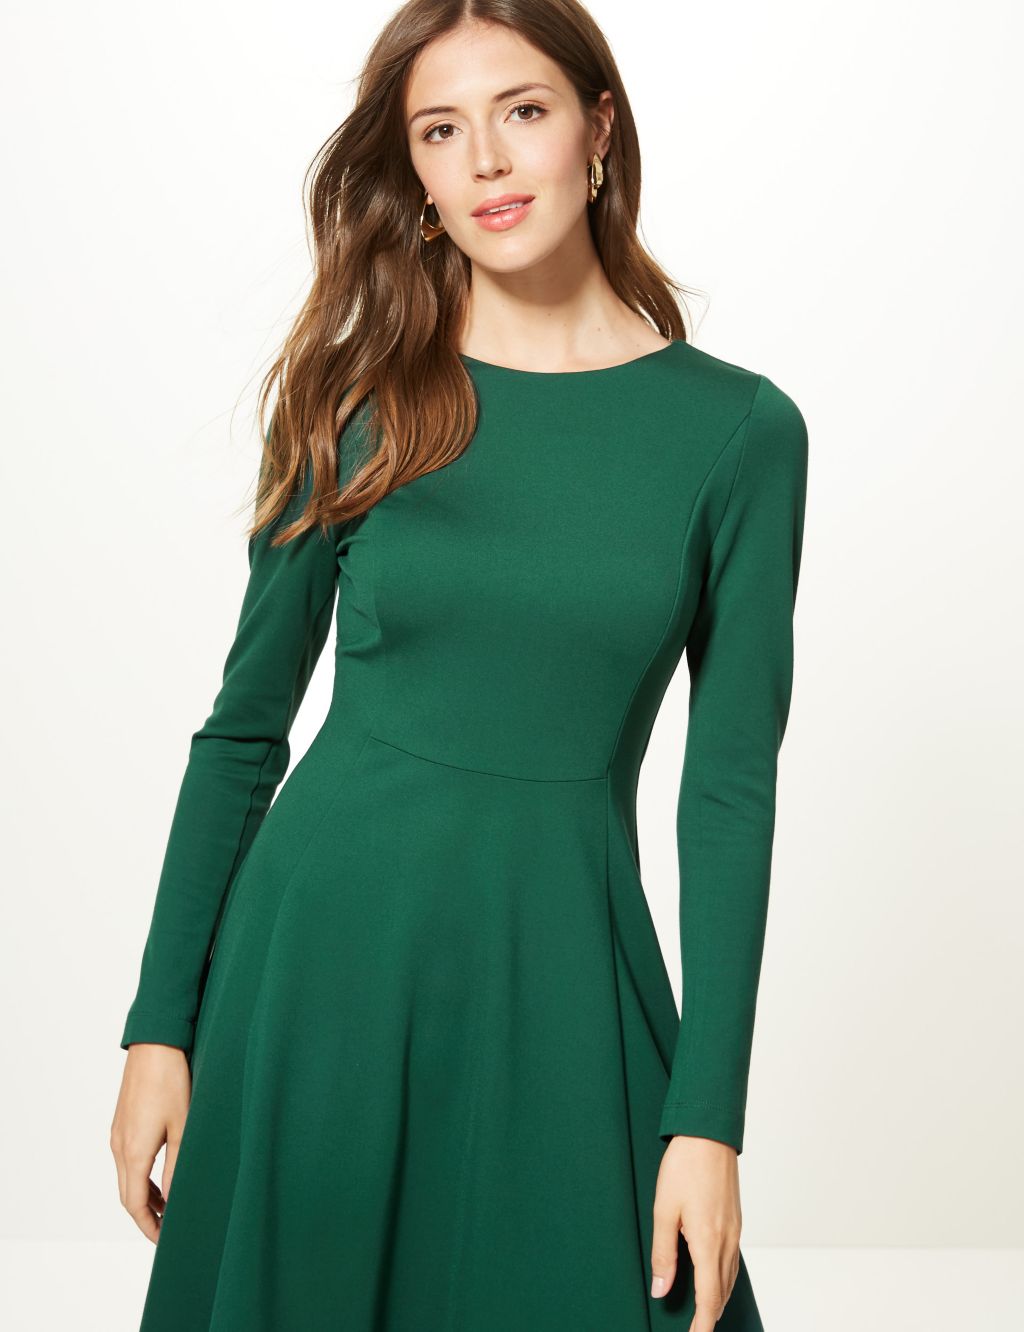 Long Sleeve Skater Dress | M&S Collection | M&S